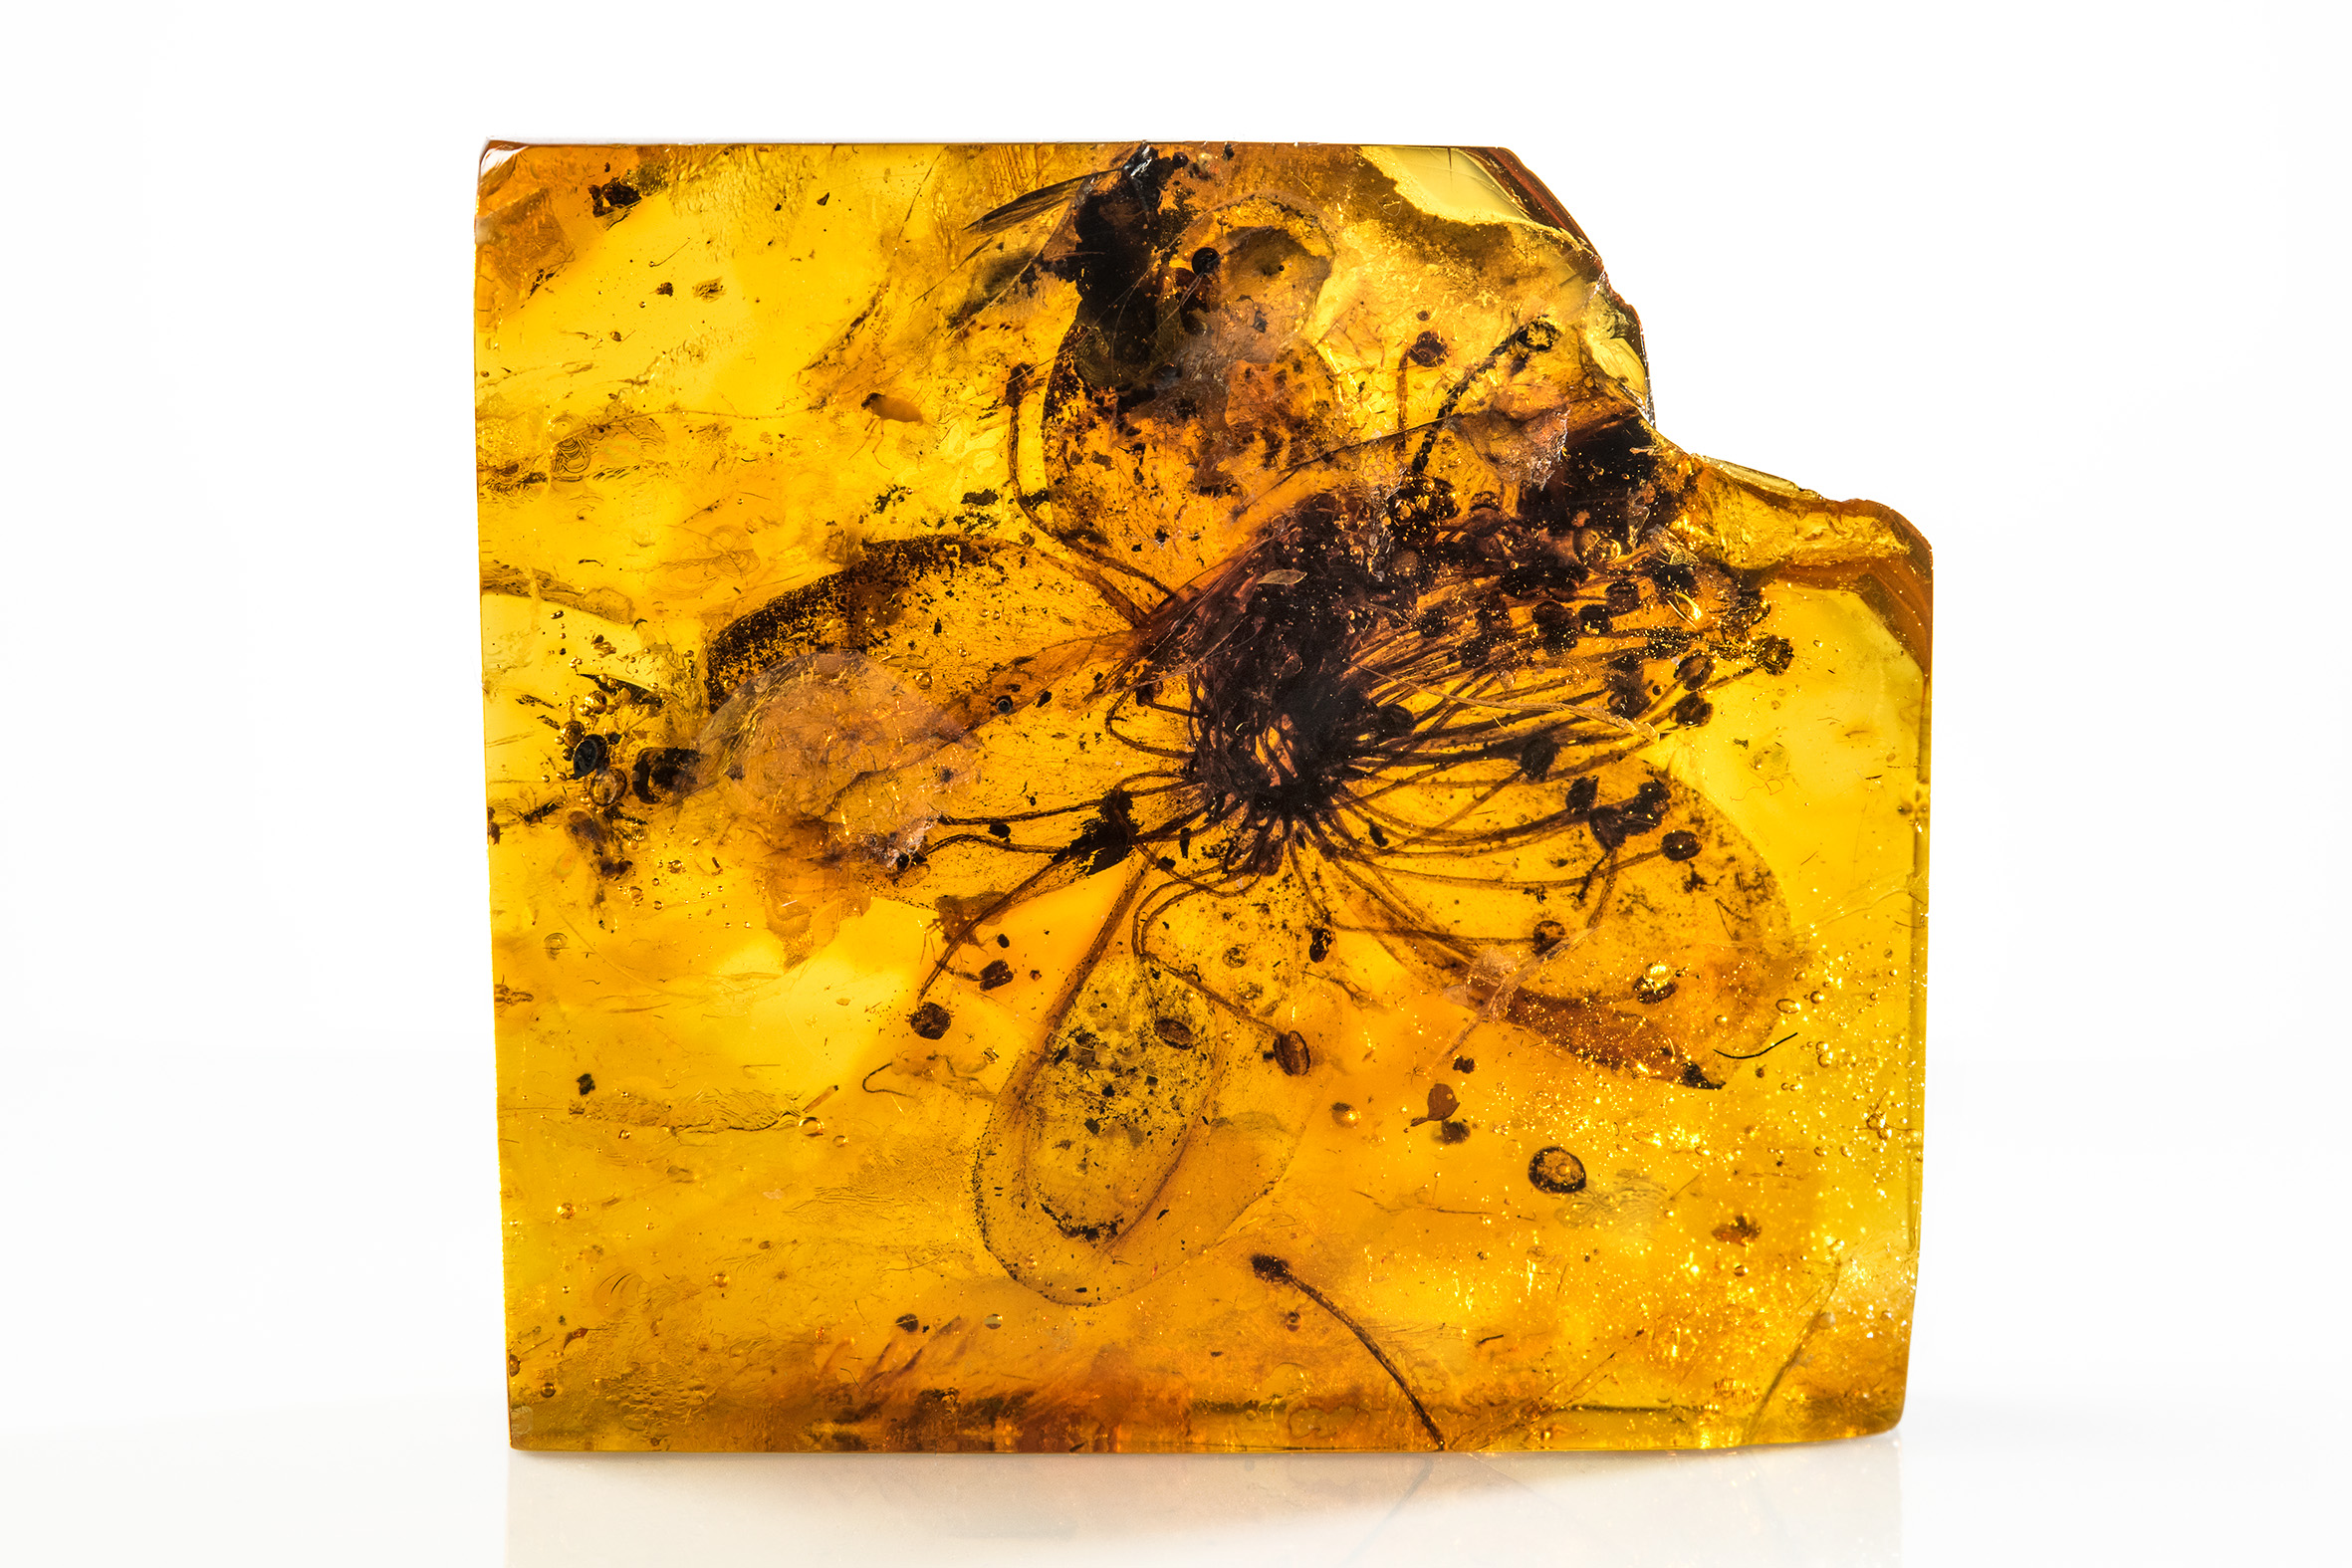 Pollen Extracted From Flower Encased in Amber 40 Million Years Ago